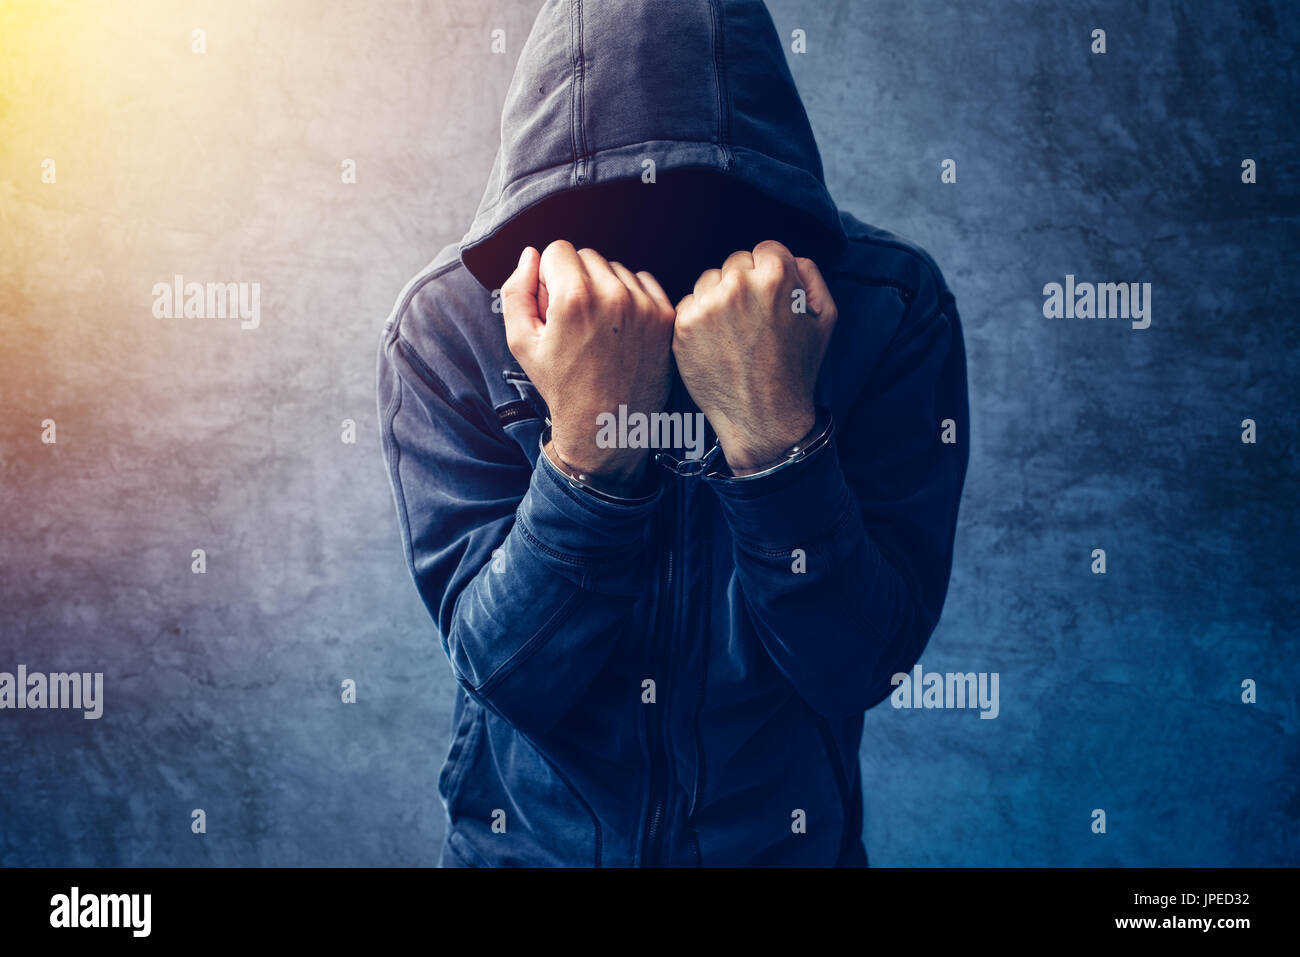 Arrested computer hacker and cyber criminal with handcuffs wearing hooded jacket hiding face Stock Photo